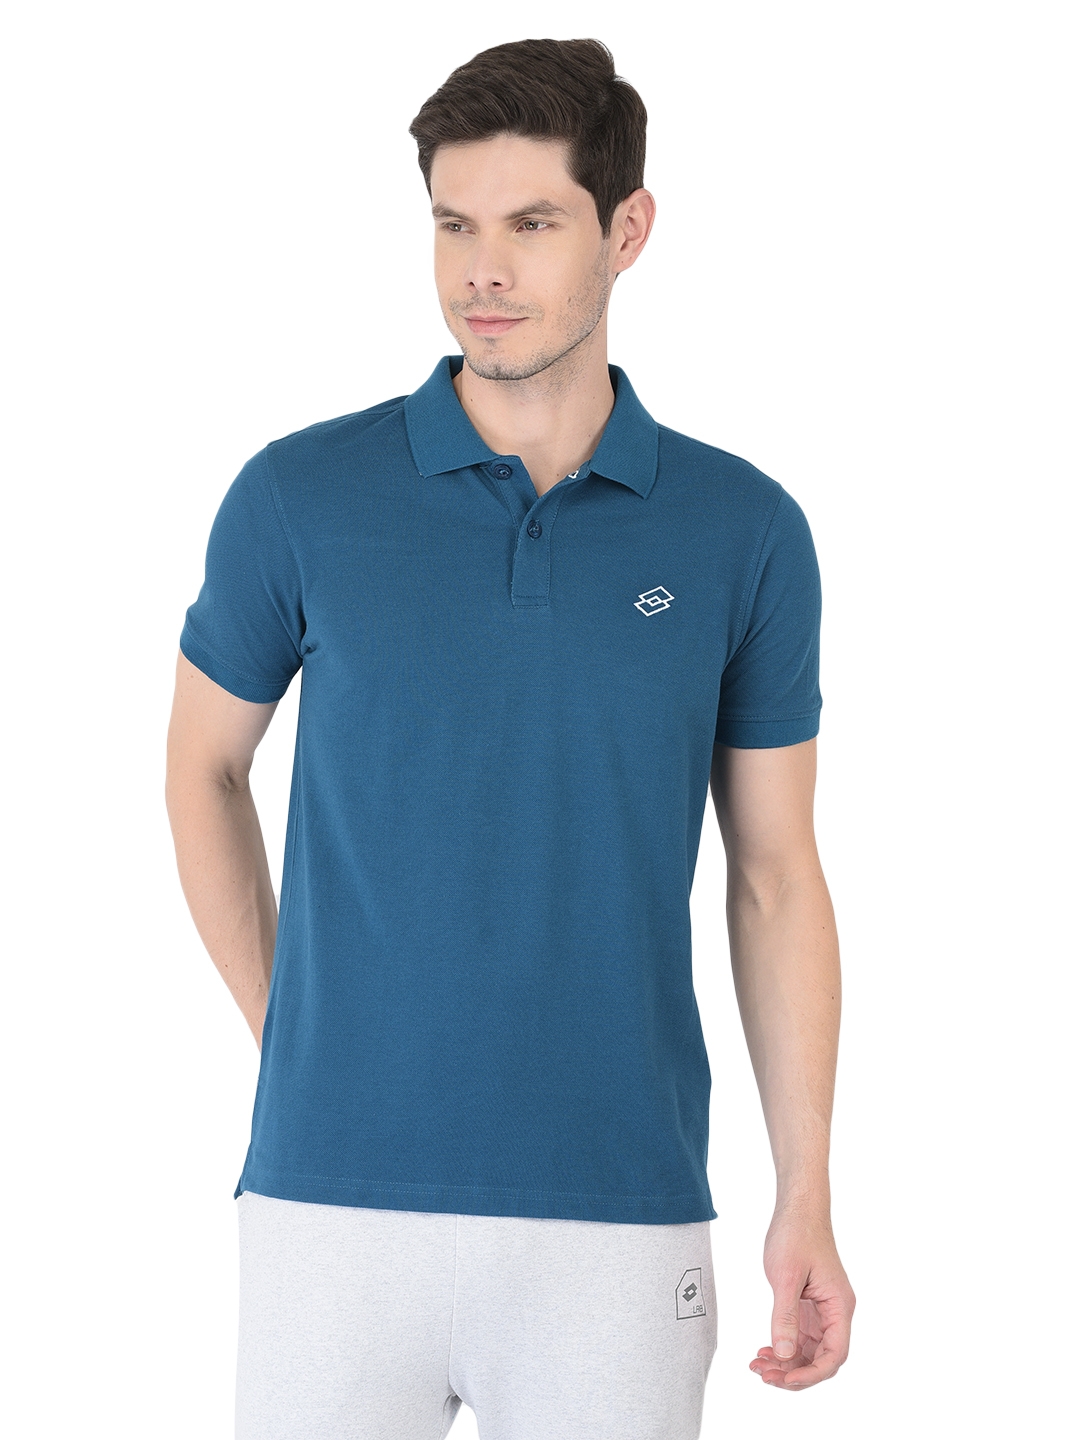 Lotto | LOTTO MEN ST FIRENZE TEAL POLO